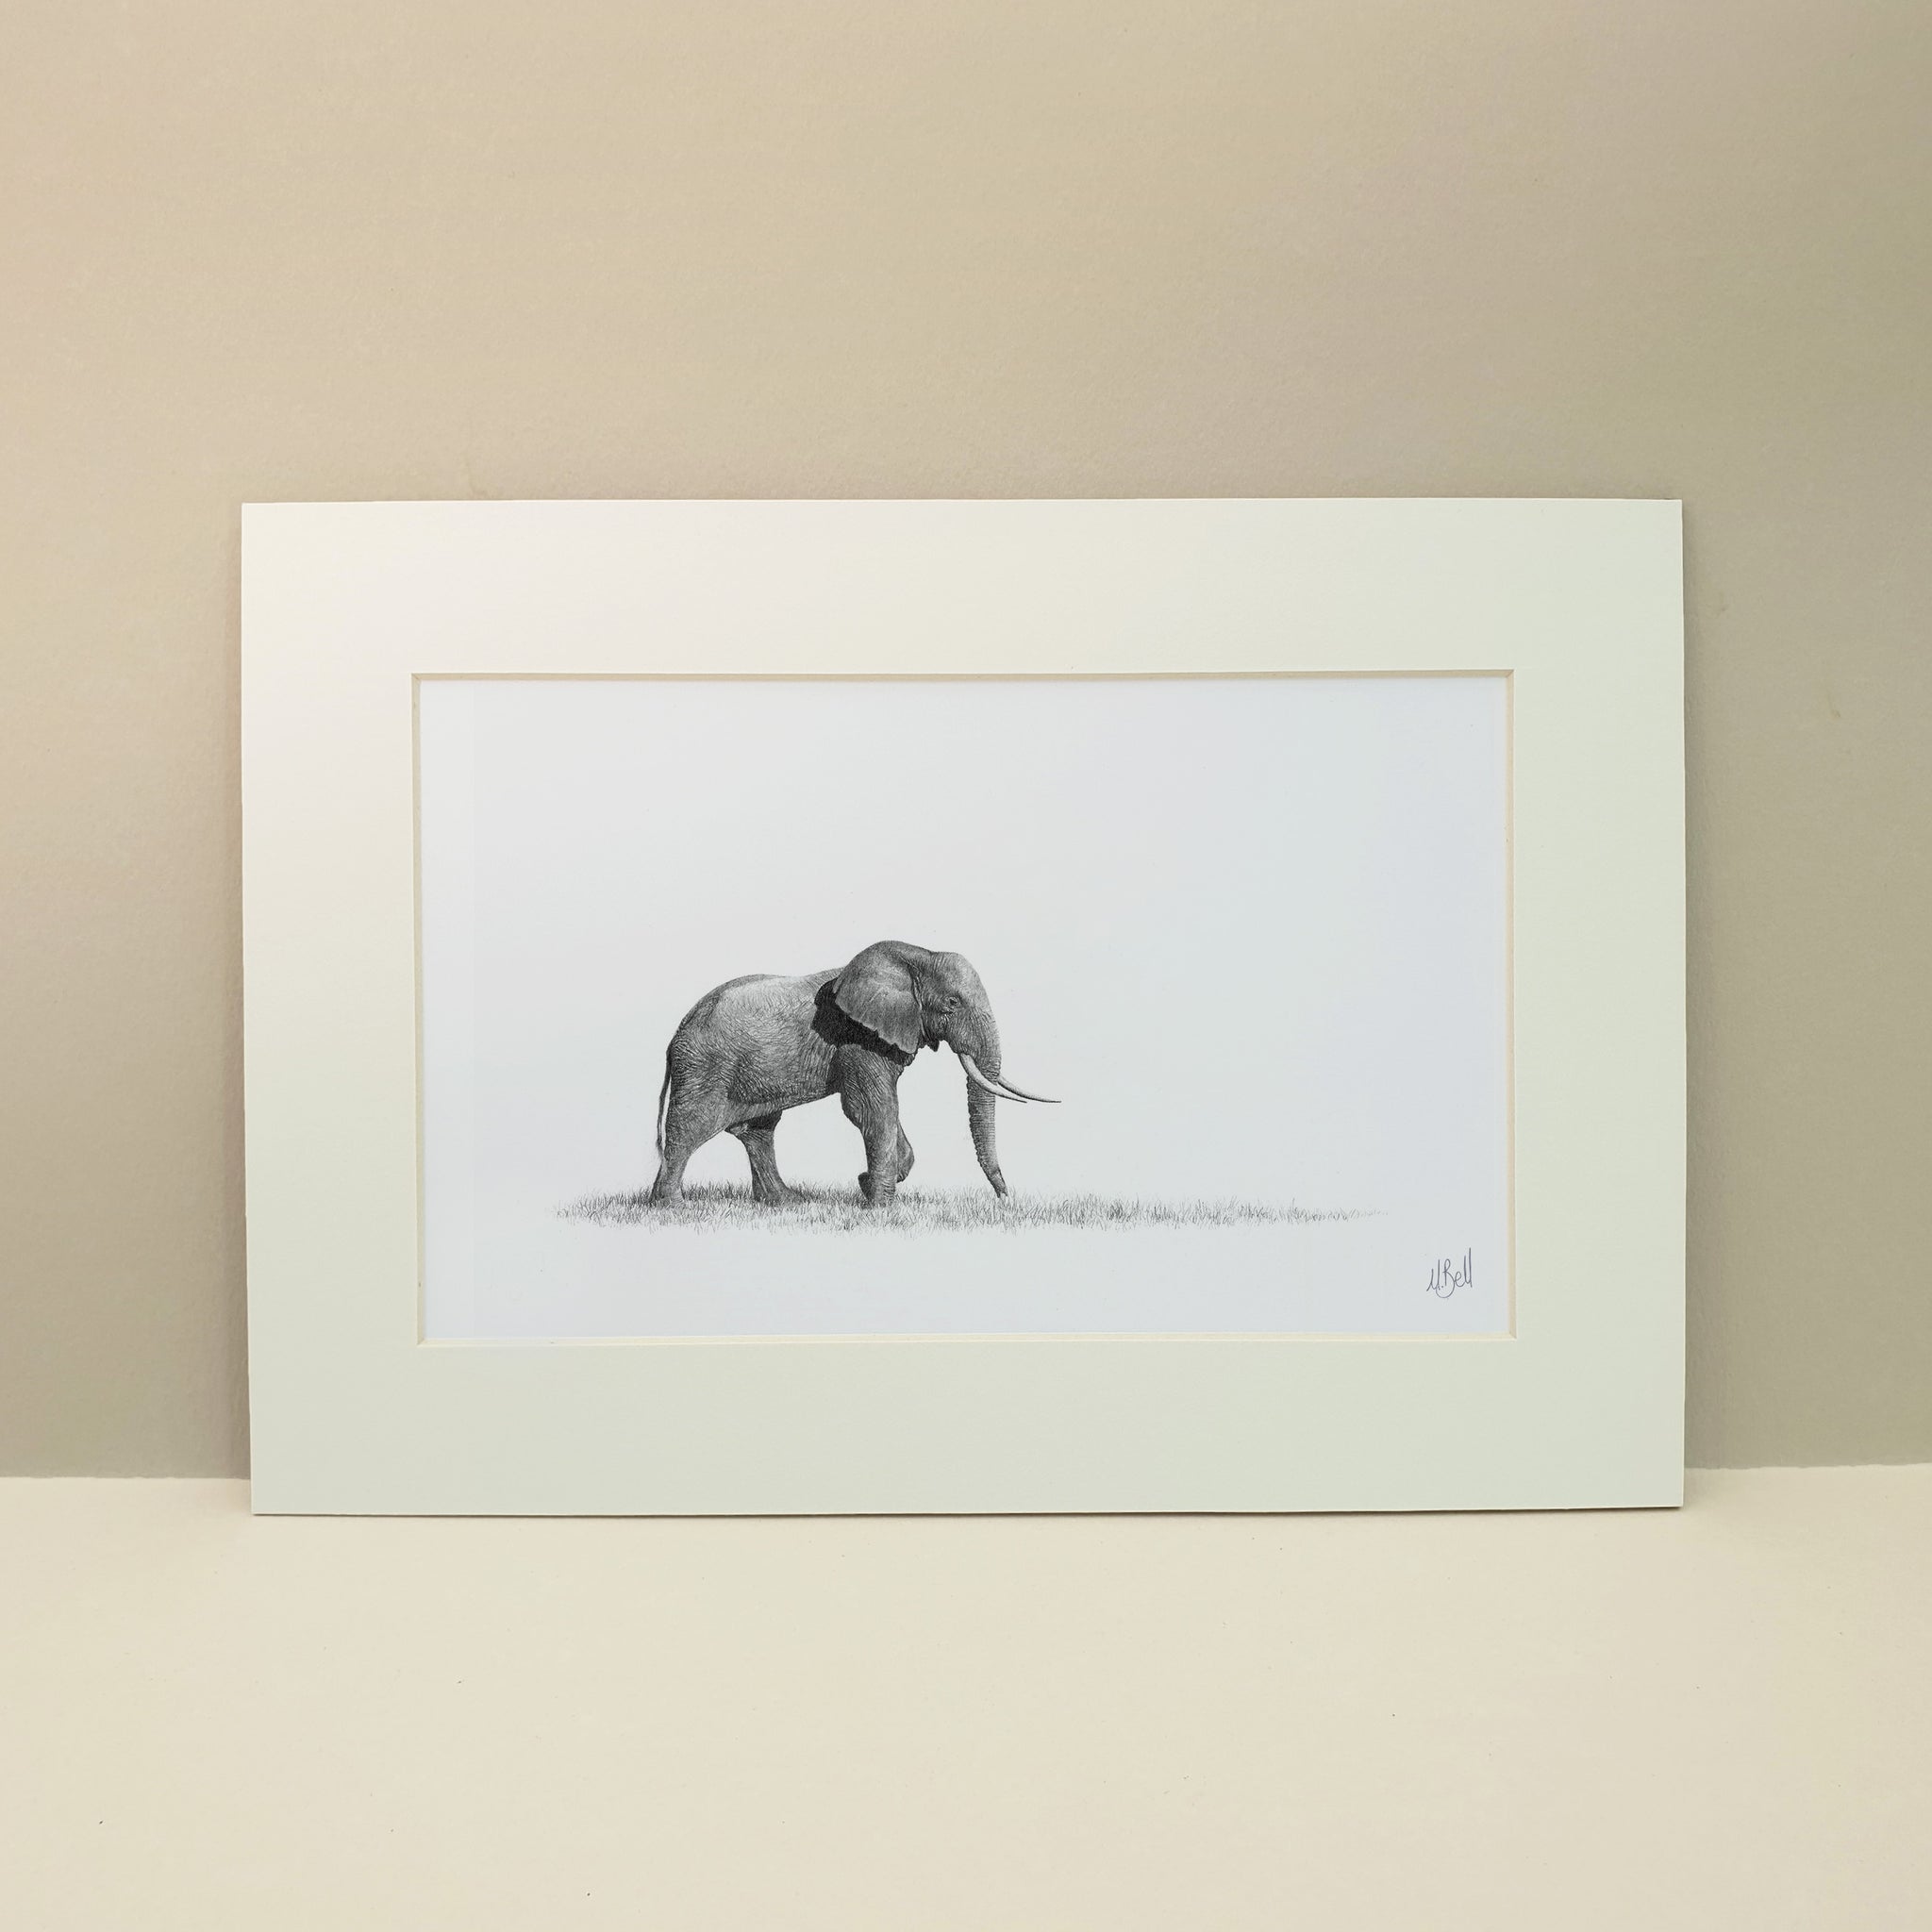 Alone African Elephant Bull small miniature drawing by Matthew Bell